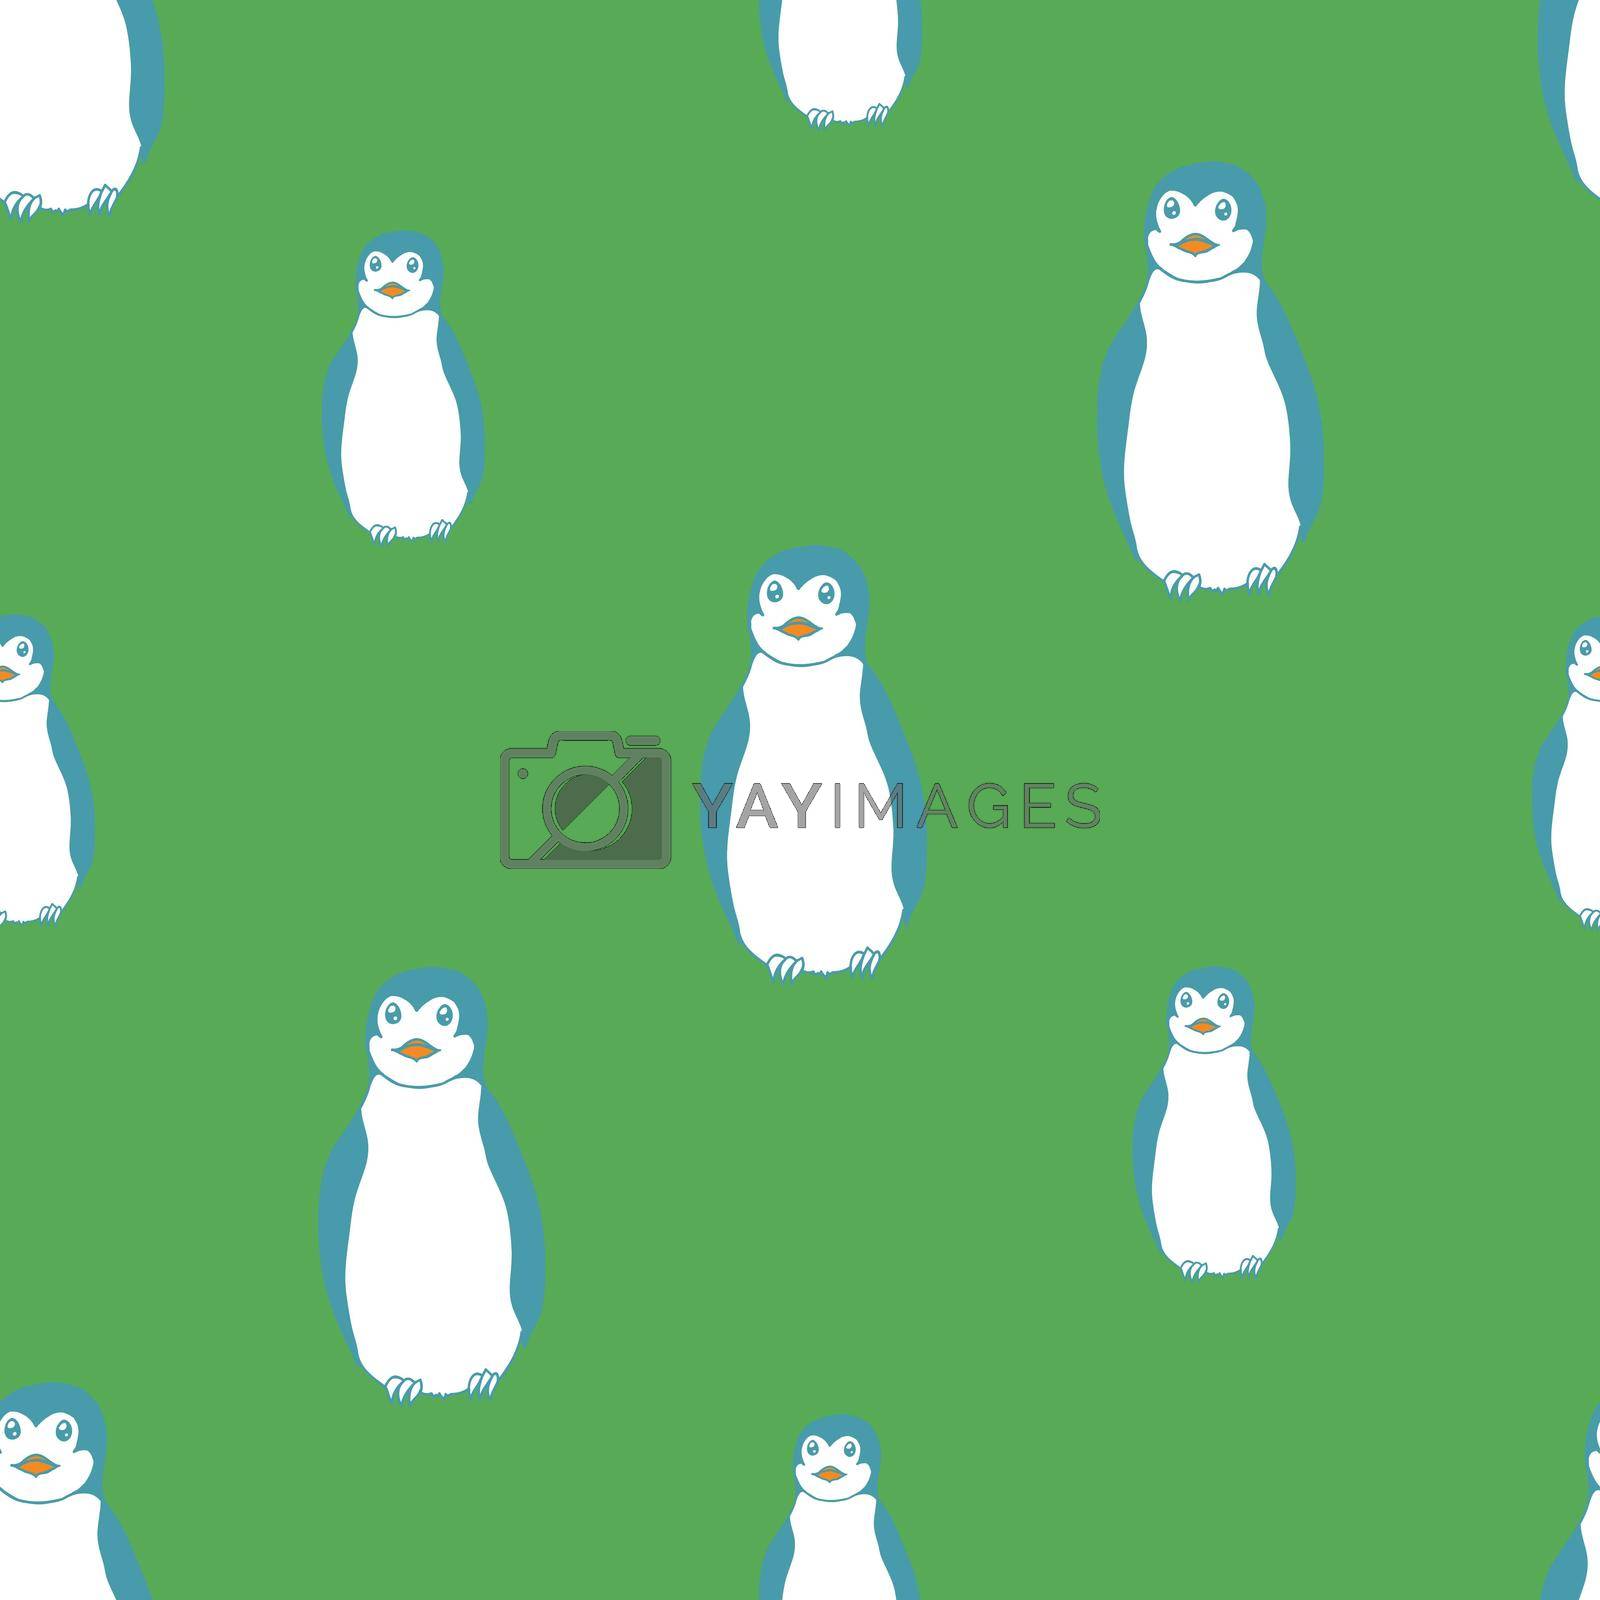 Royalty free image of Children's novelty penguins in checker pattern on green background. by rosewg